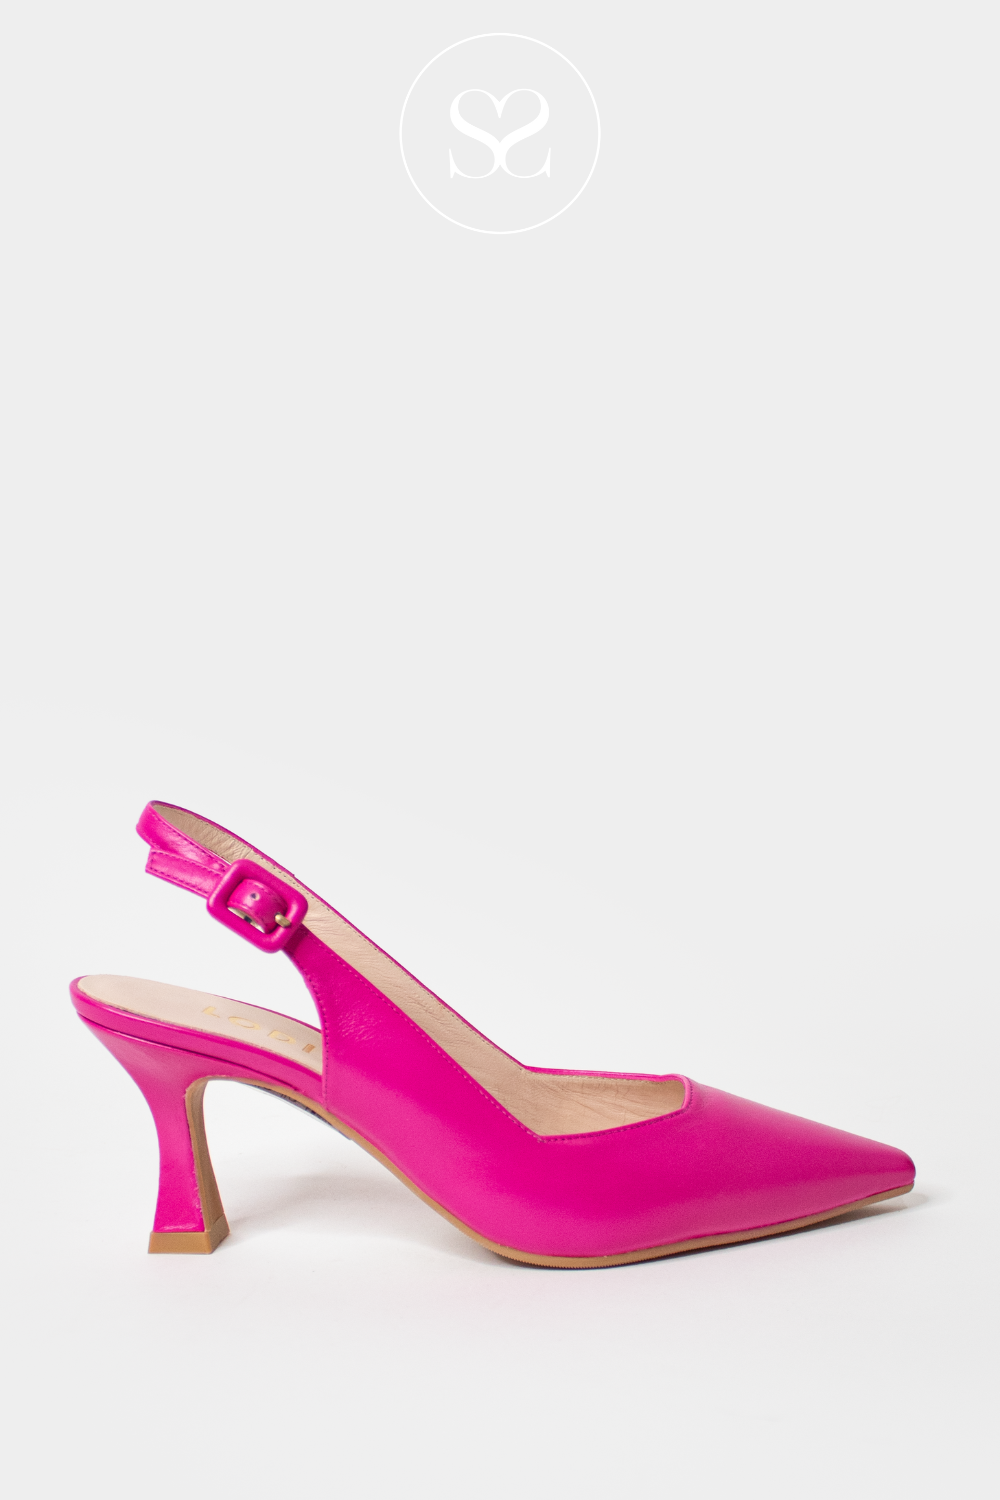 LODI JUCO PINK SLINGBACK POINTED TOE COURT SHOES